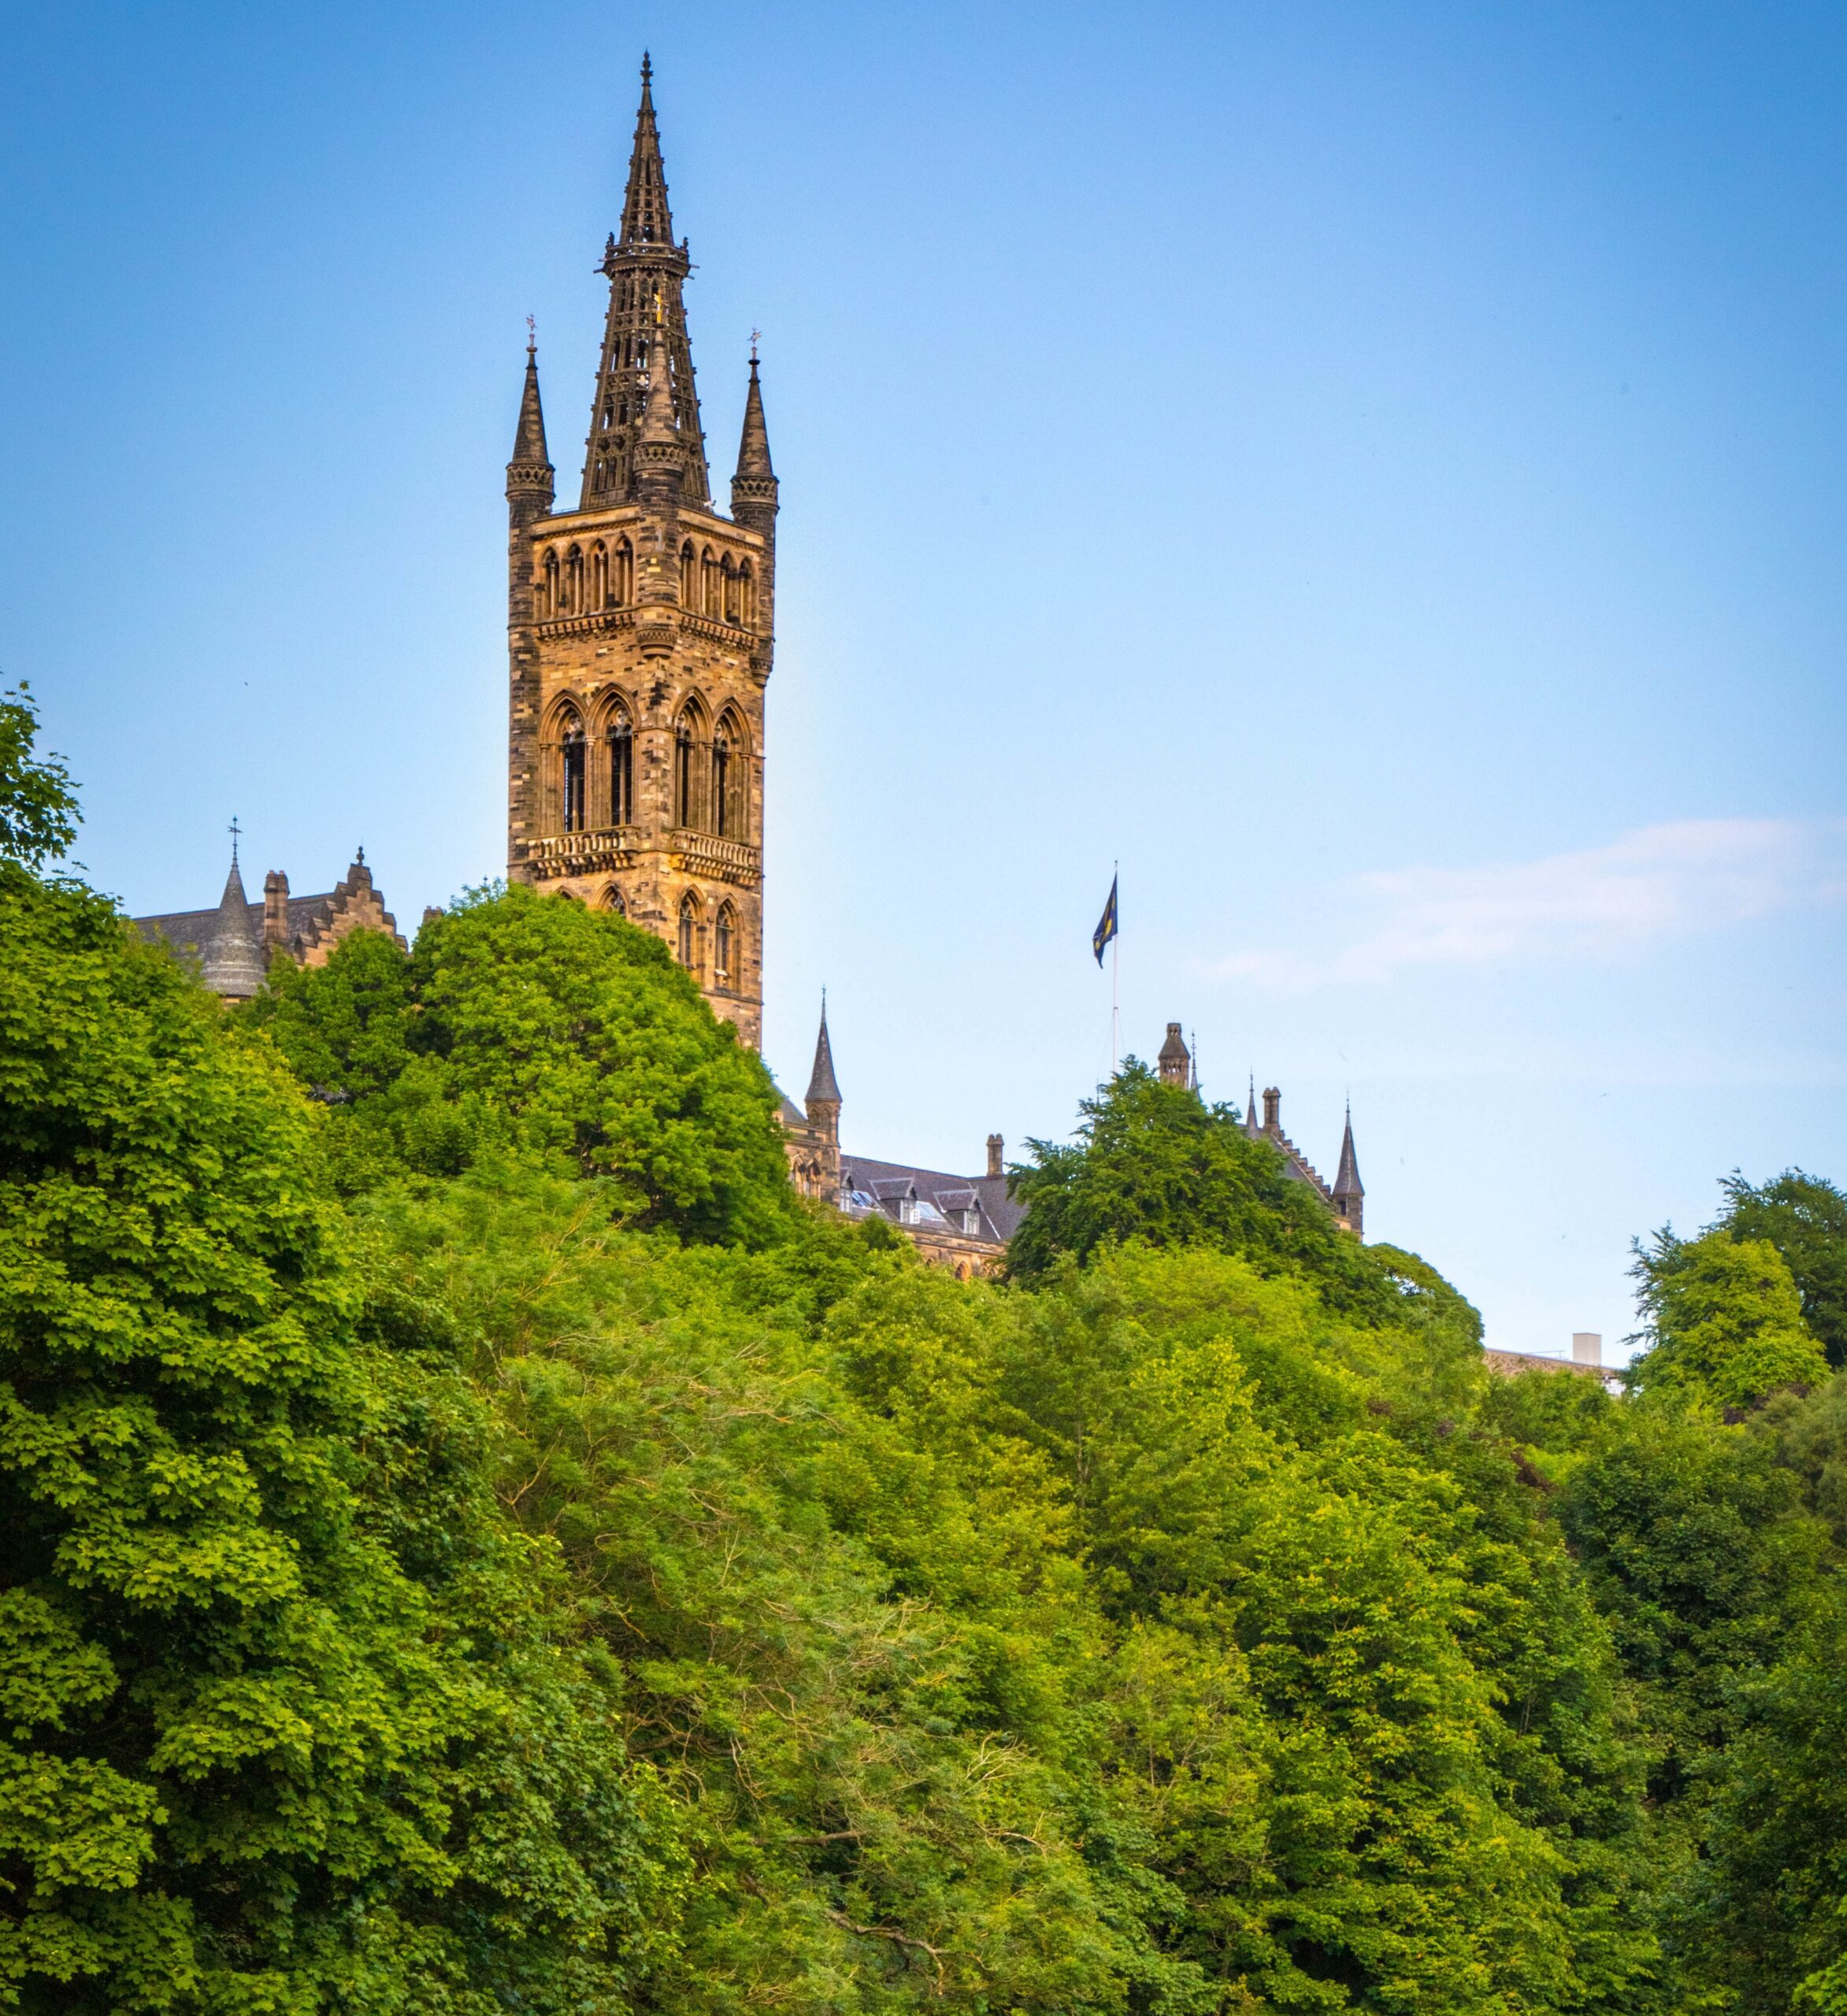 Glasgow launches online tool to support reforestation